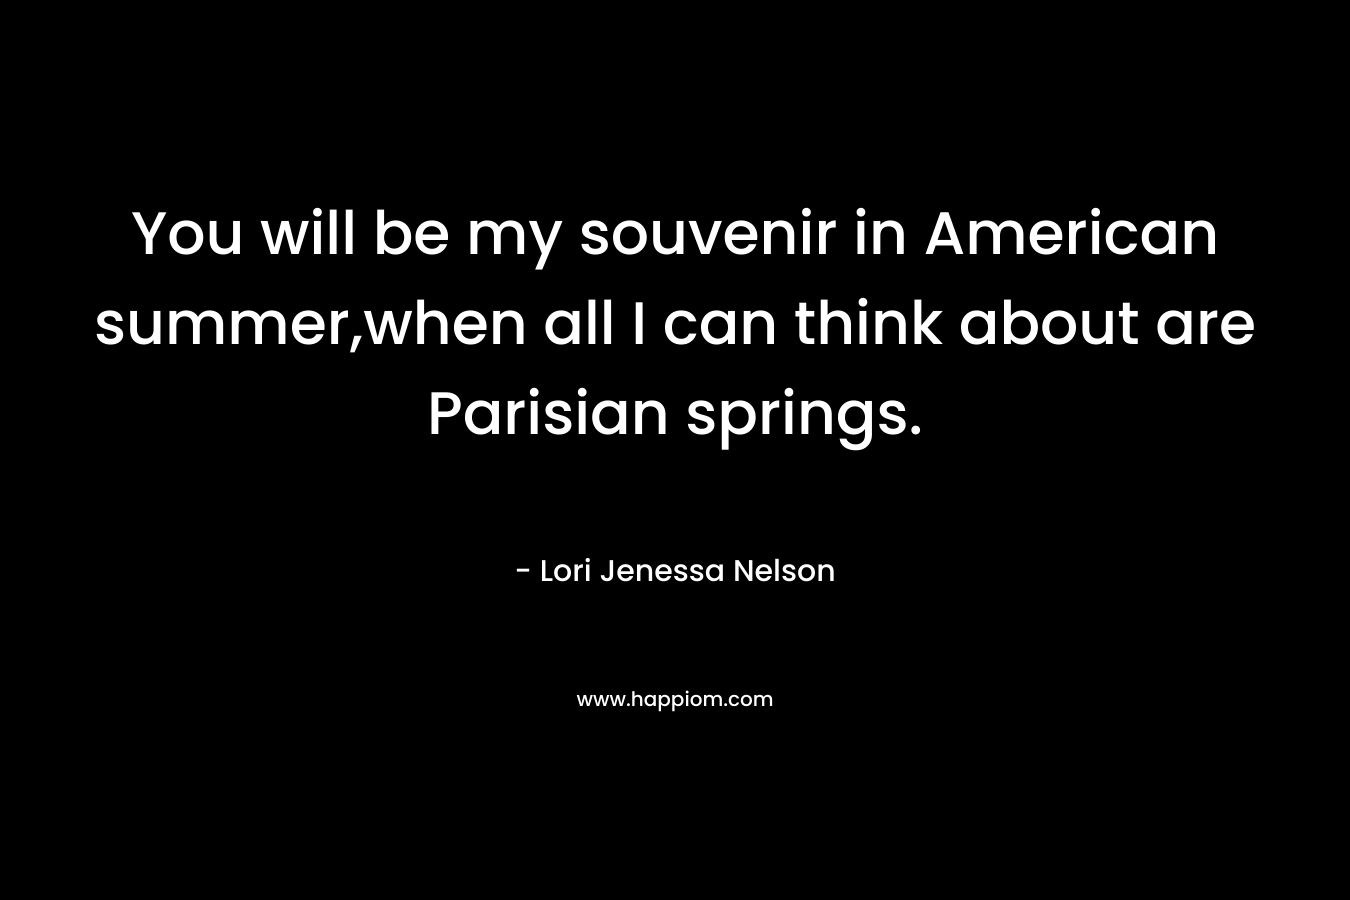 You will be my souvenir in American summer,when all I can think about are Parisian springs.